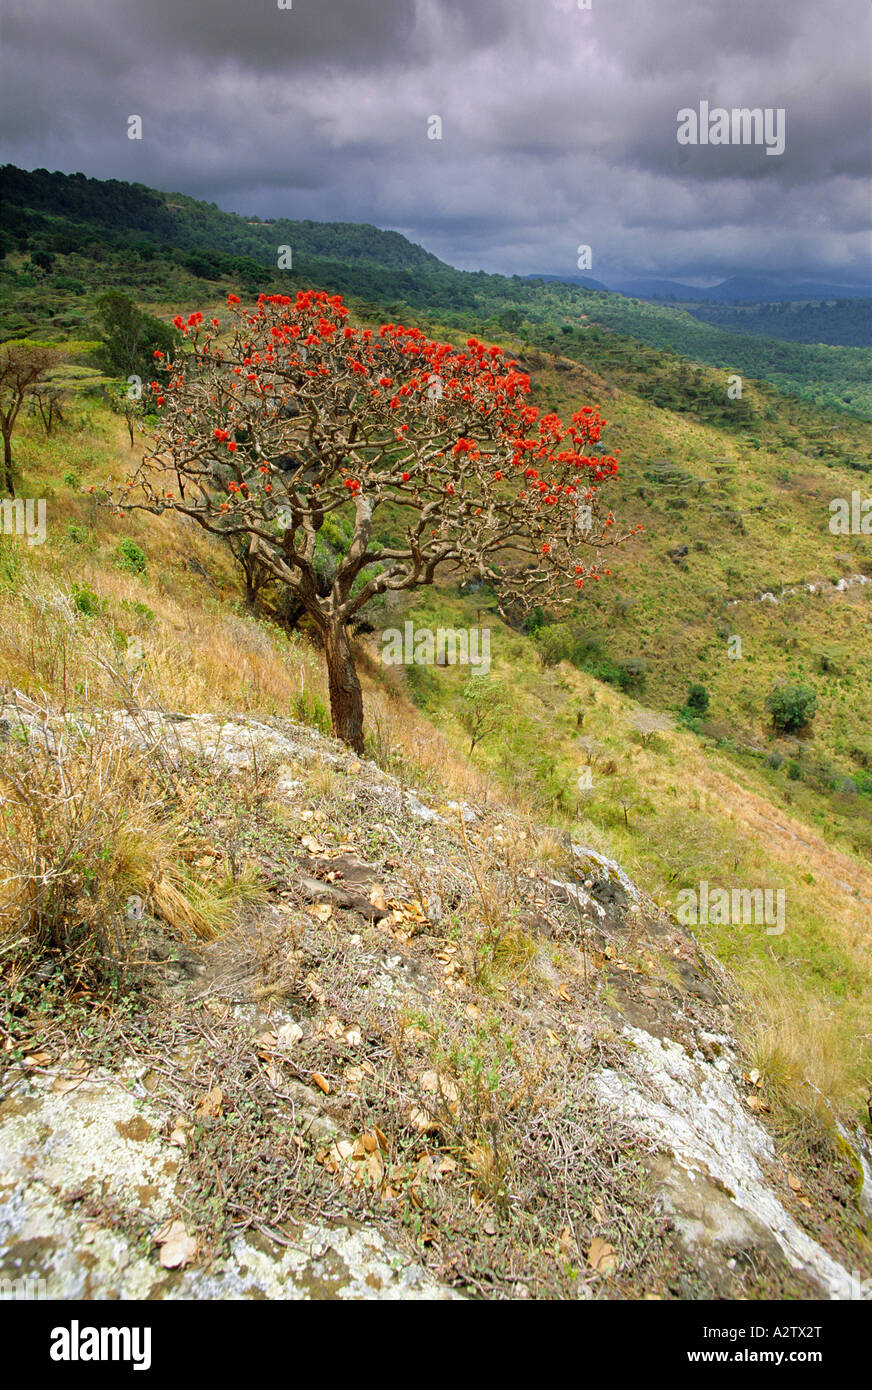 View from Mount Elgon with flowering shrub and montane forest, Kenya, East Africa Stock Photo